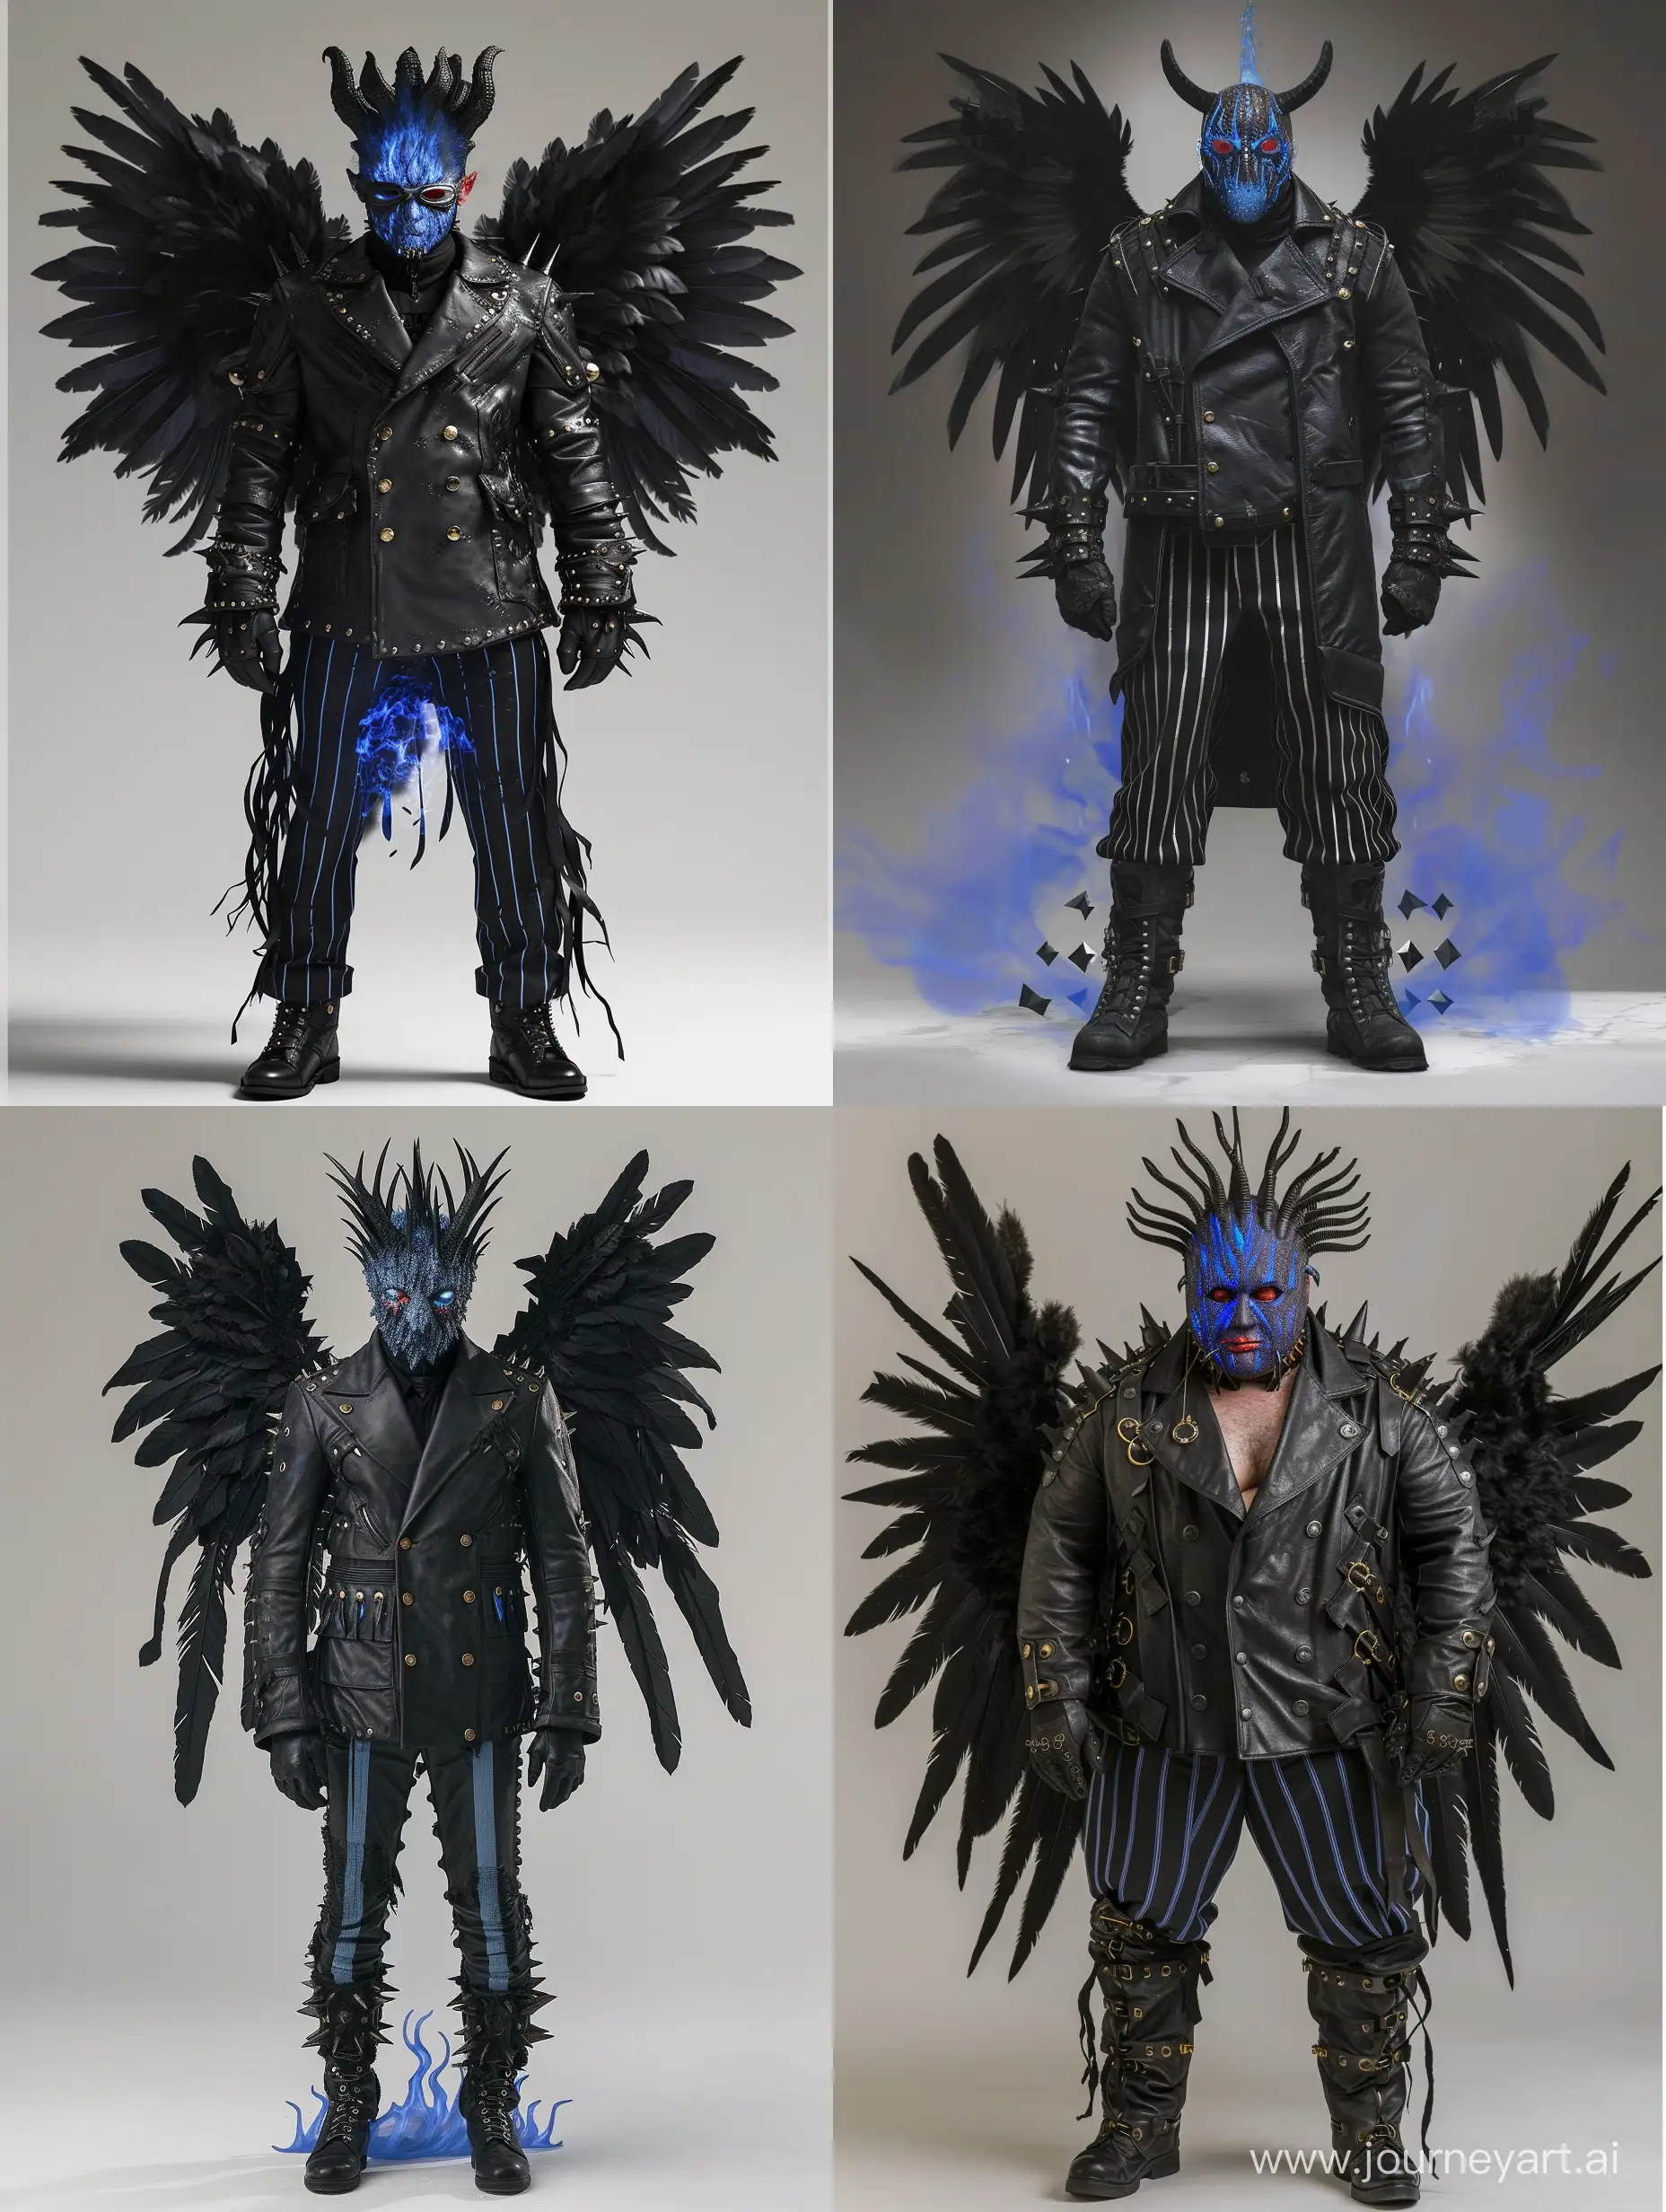 Mysterious-FireWinged-Figure-in-Dark-Leather-Ensemble